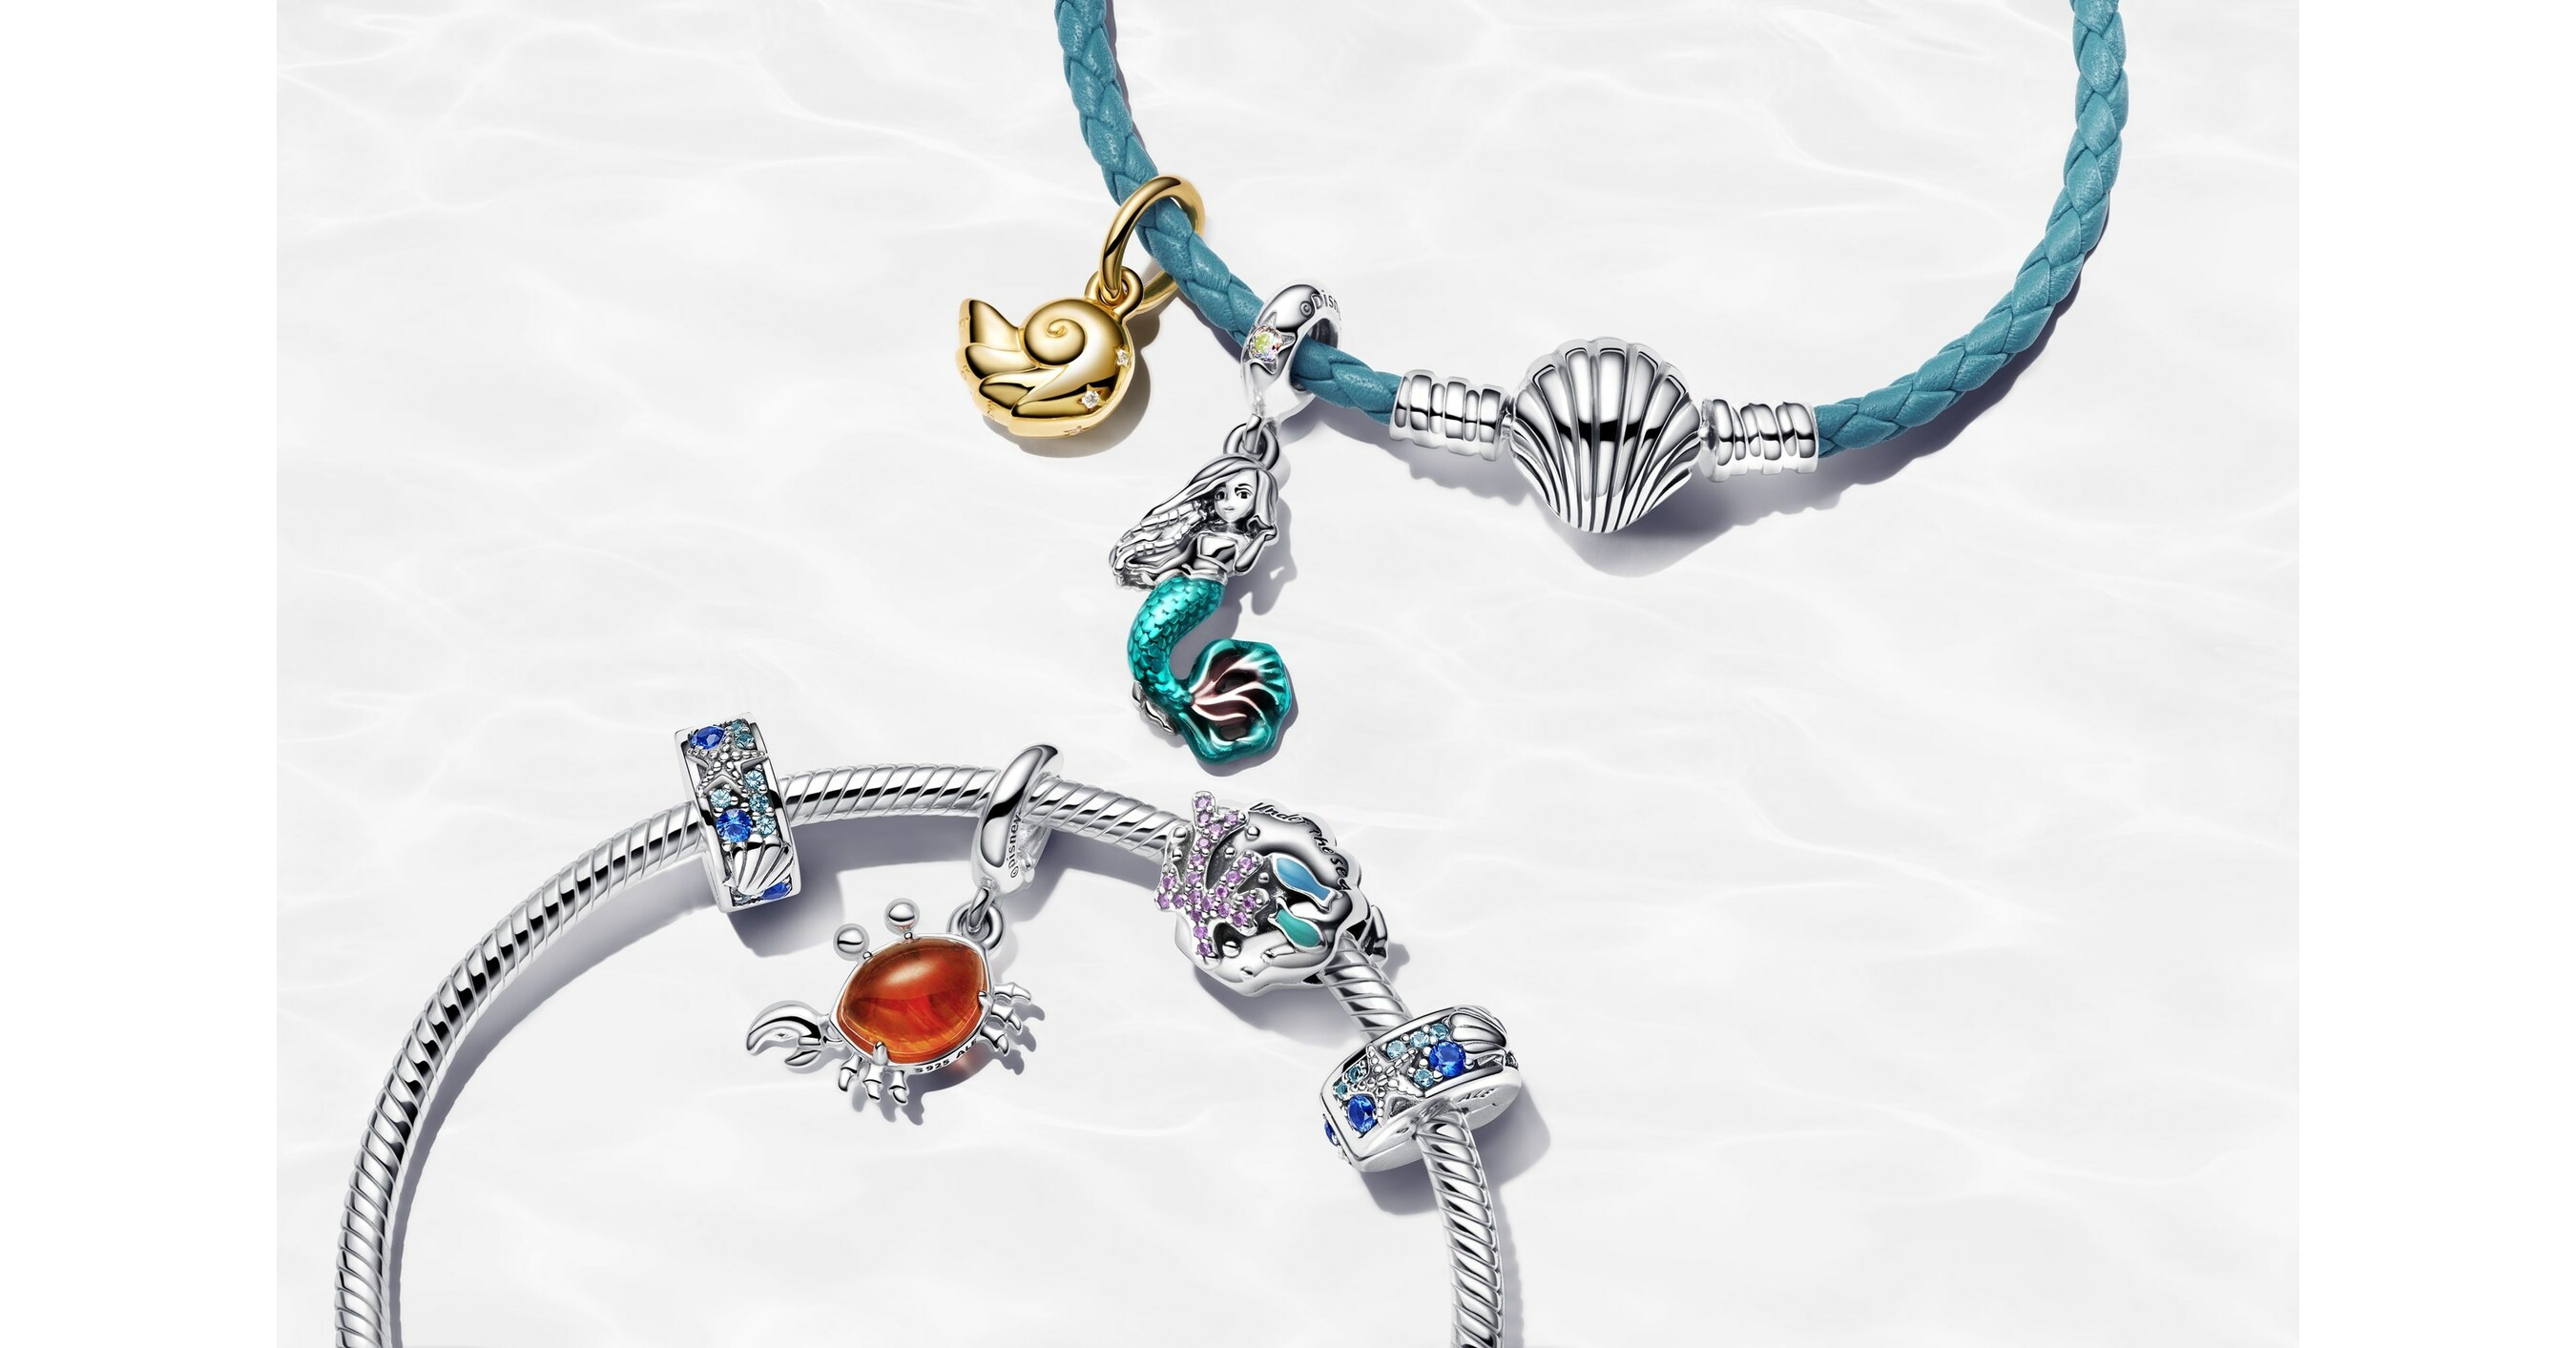 skære Ride Distrahere Pandora announces The Little Mermaid collection to celebrate Disney's  all-new movie